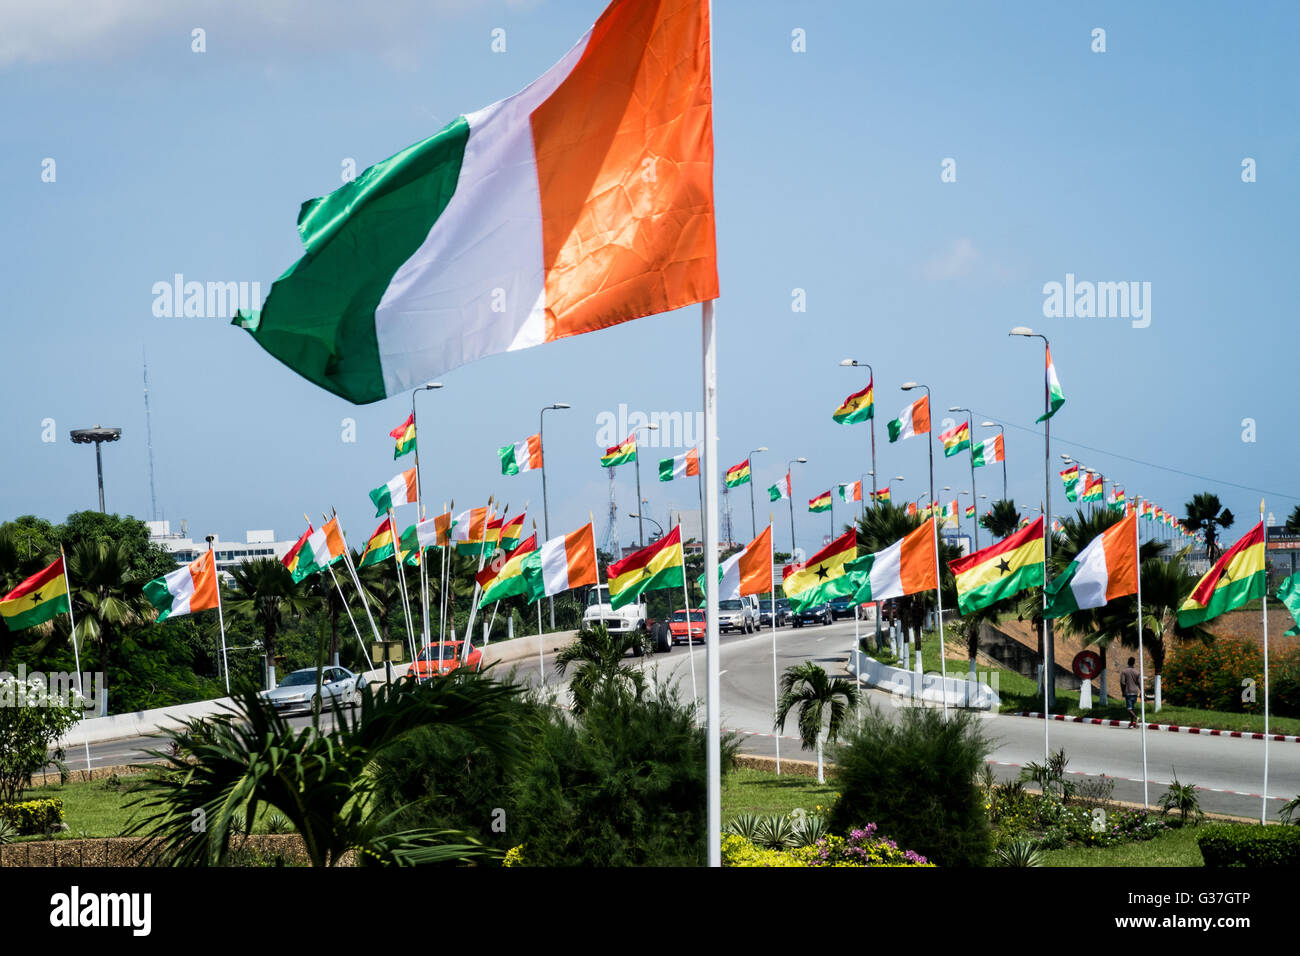 Flag of Côte d'Ivoire or Ivory Coast (foreground). Mix of flags of Côte d'Ivoire and Ghana seen in background. Stock Photo